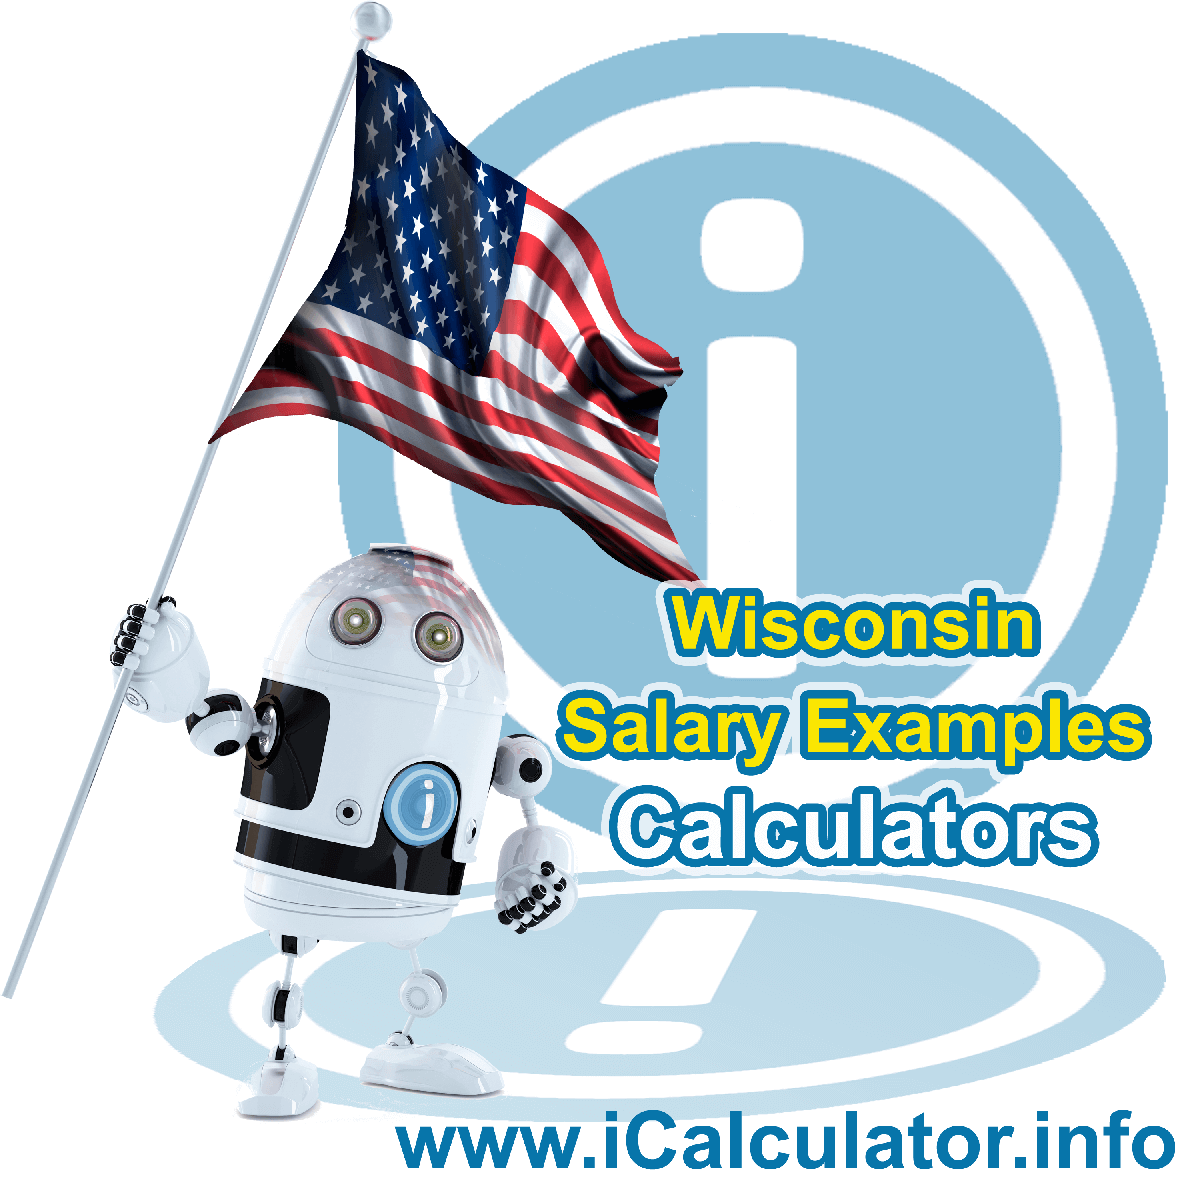 Wisconsin Salary Example for $ 10,000.00 in 2023 | iCalculator™ | $ 10,000.00 salary example for employee and employer paying Wisconsin State tincome taxes. Detailed salary after tax calculation including Wisconsin State Tax, Federal State Tax, Medicare Deductions, Social Security, Capital Gains and other income tax and salary deductions complete with supporting Wisconsin state tax tables 